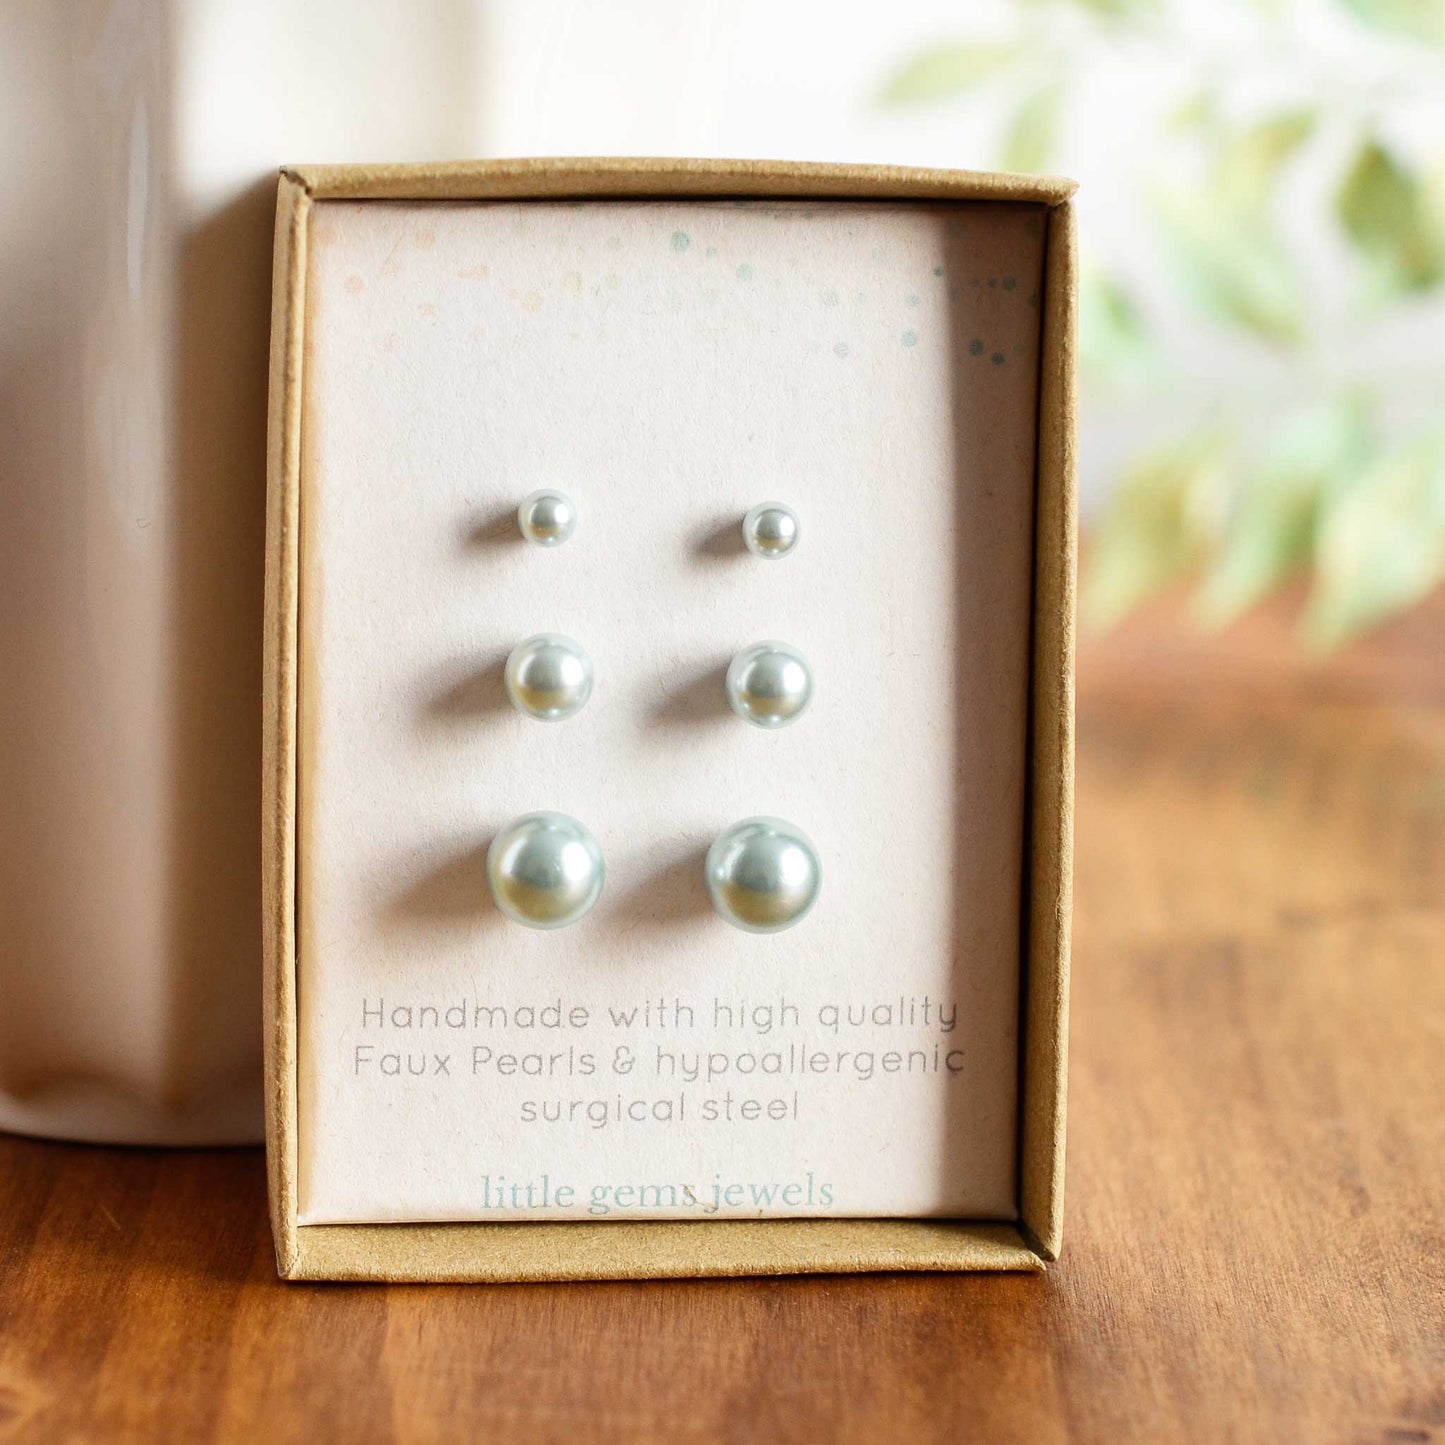 Set of three pale blue faux pearl stud earrings in eco friendly gift box